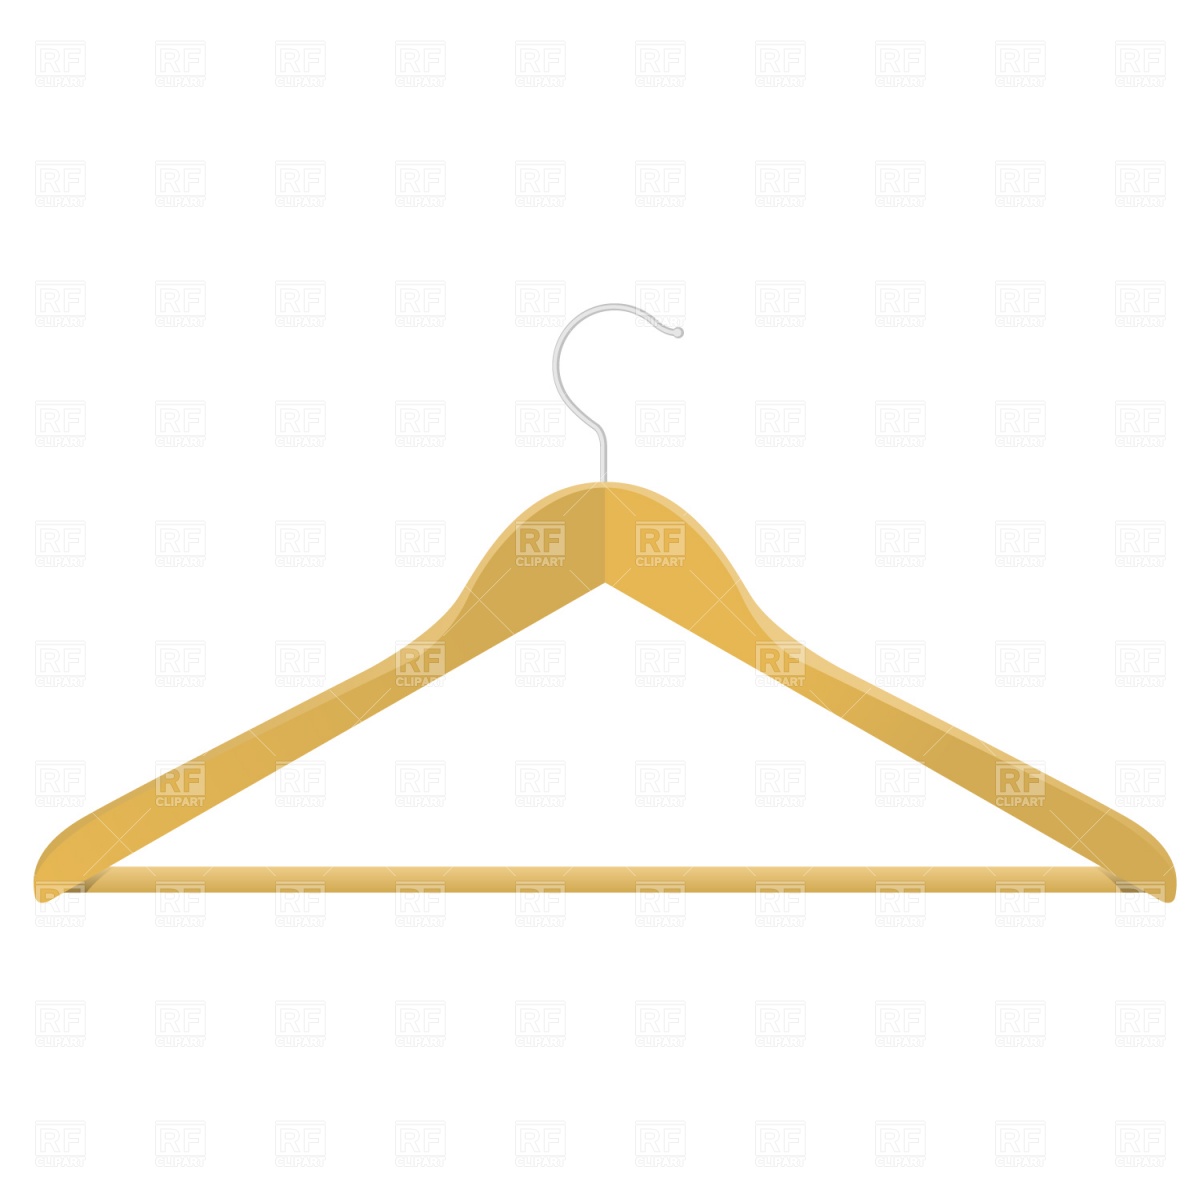 Wooden Clothes Hanger Download Royalty Free Vector Clipart  Eps